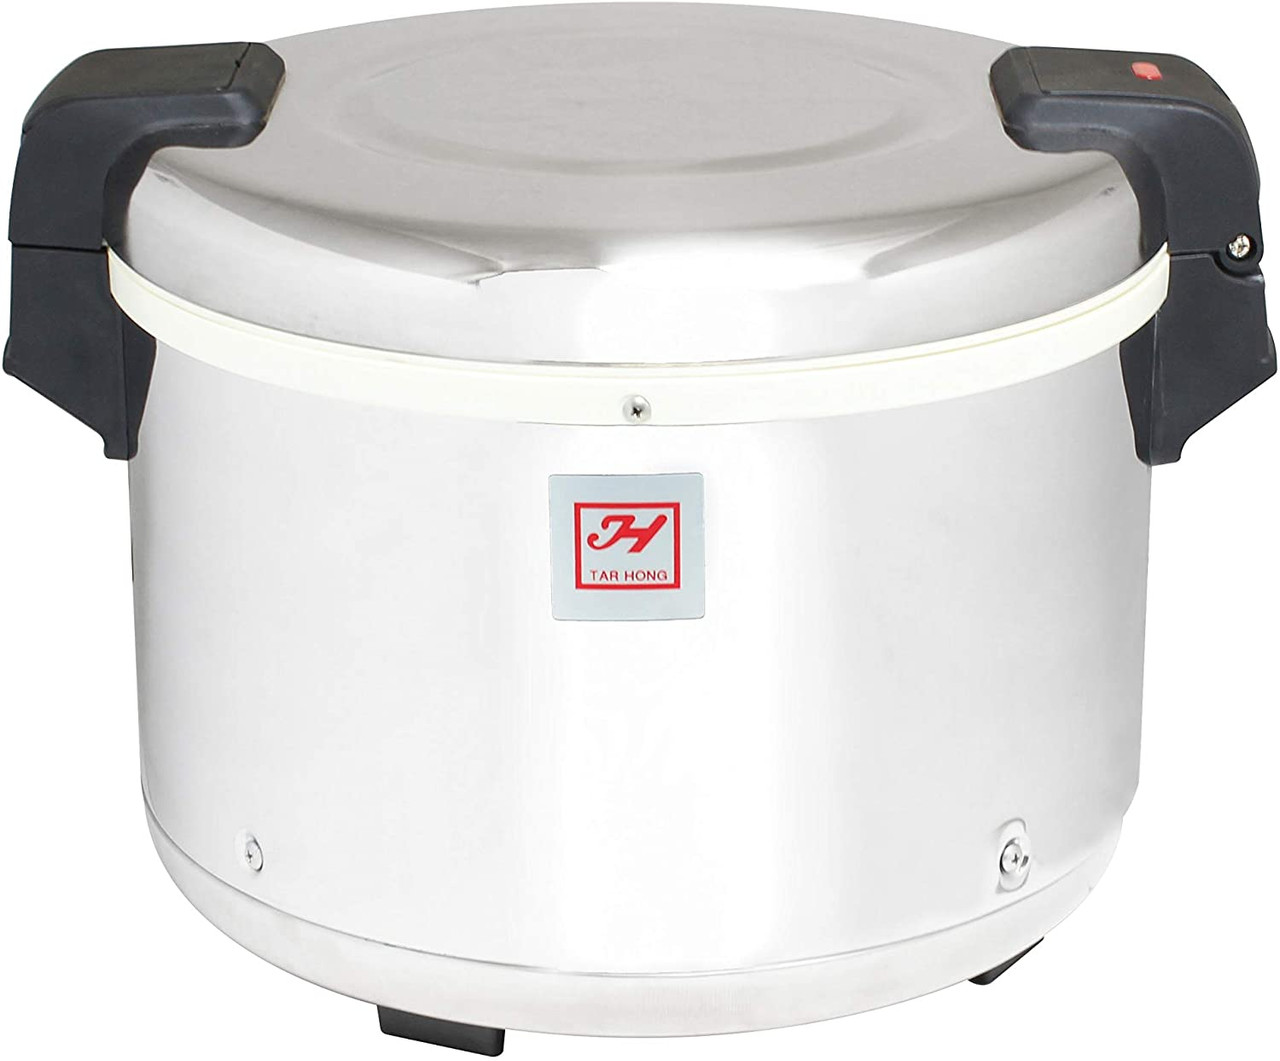 Rice Cooker/Warmer, 30 Cup, Silver, Non-Stick, Thunder Group SEJ50000T